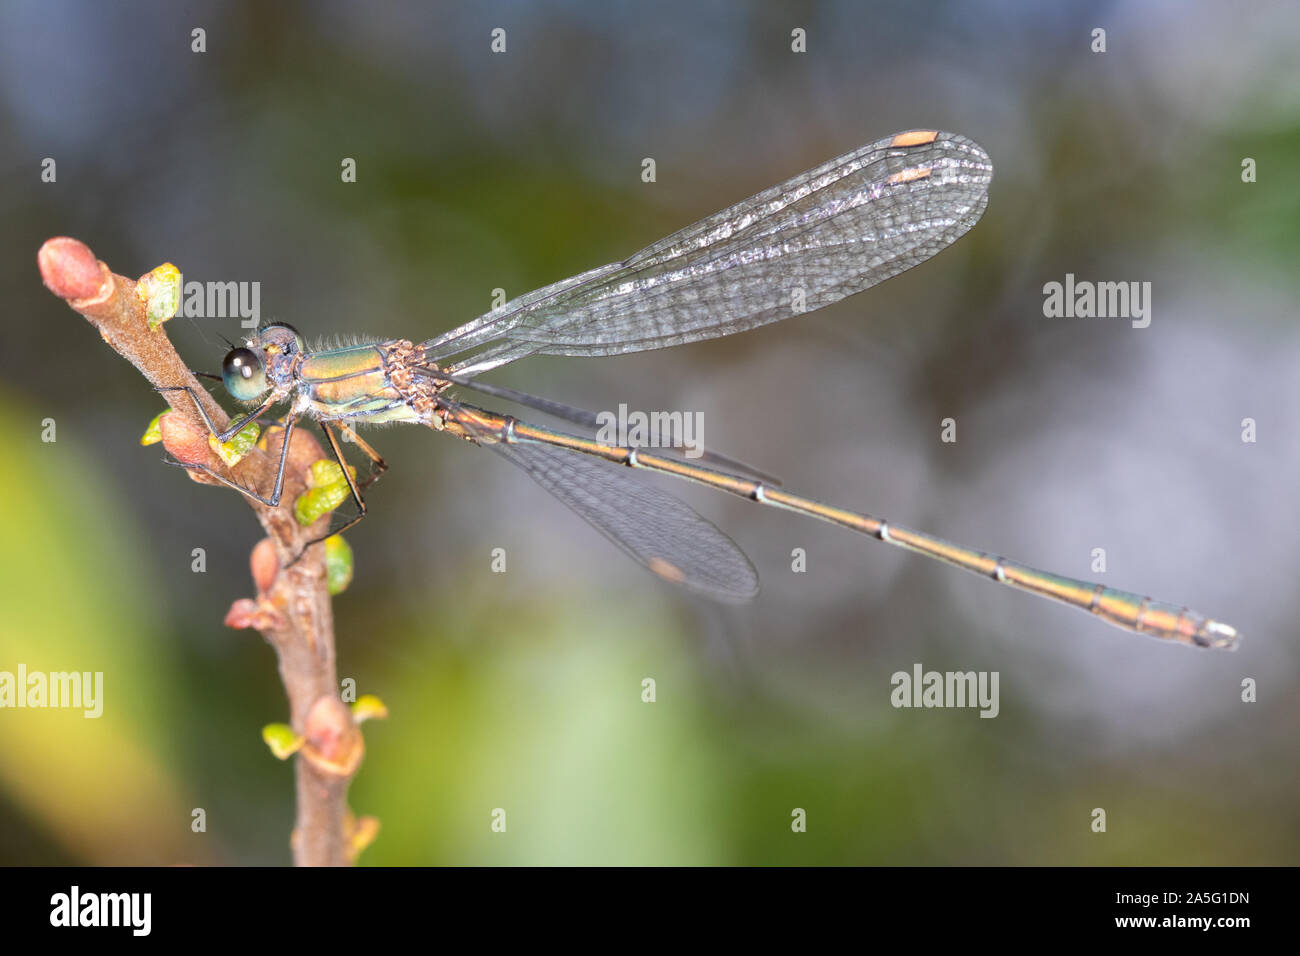 Willow Emerald Damselfly (Lestes viridis) resting on a willow branch Stock Photo